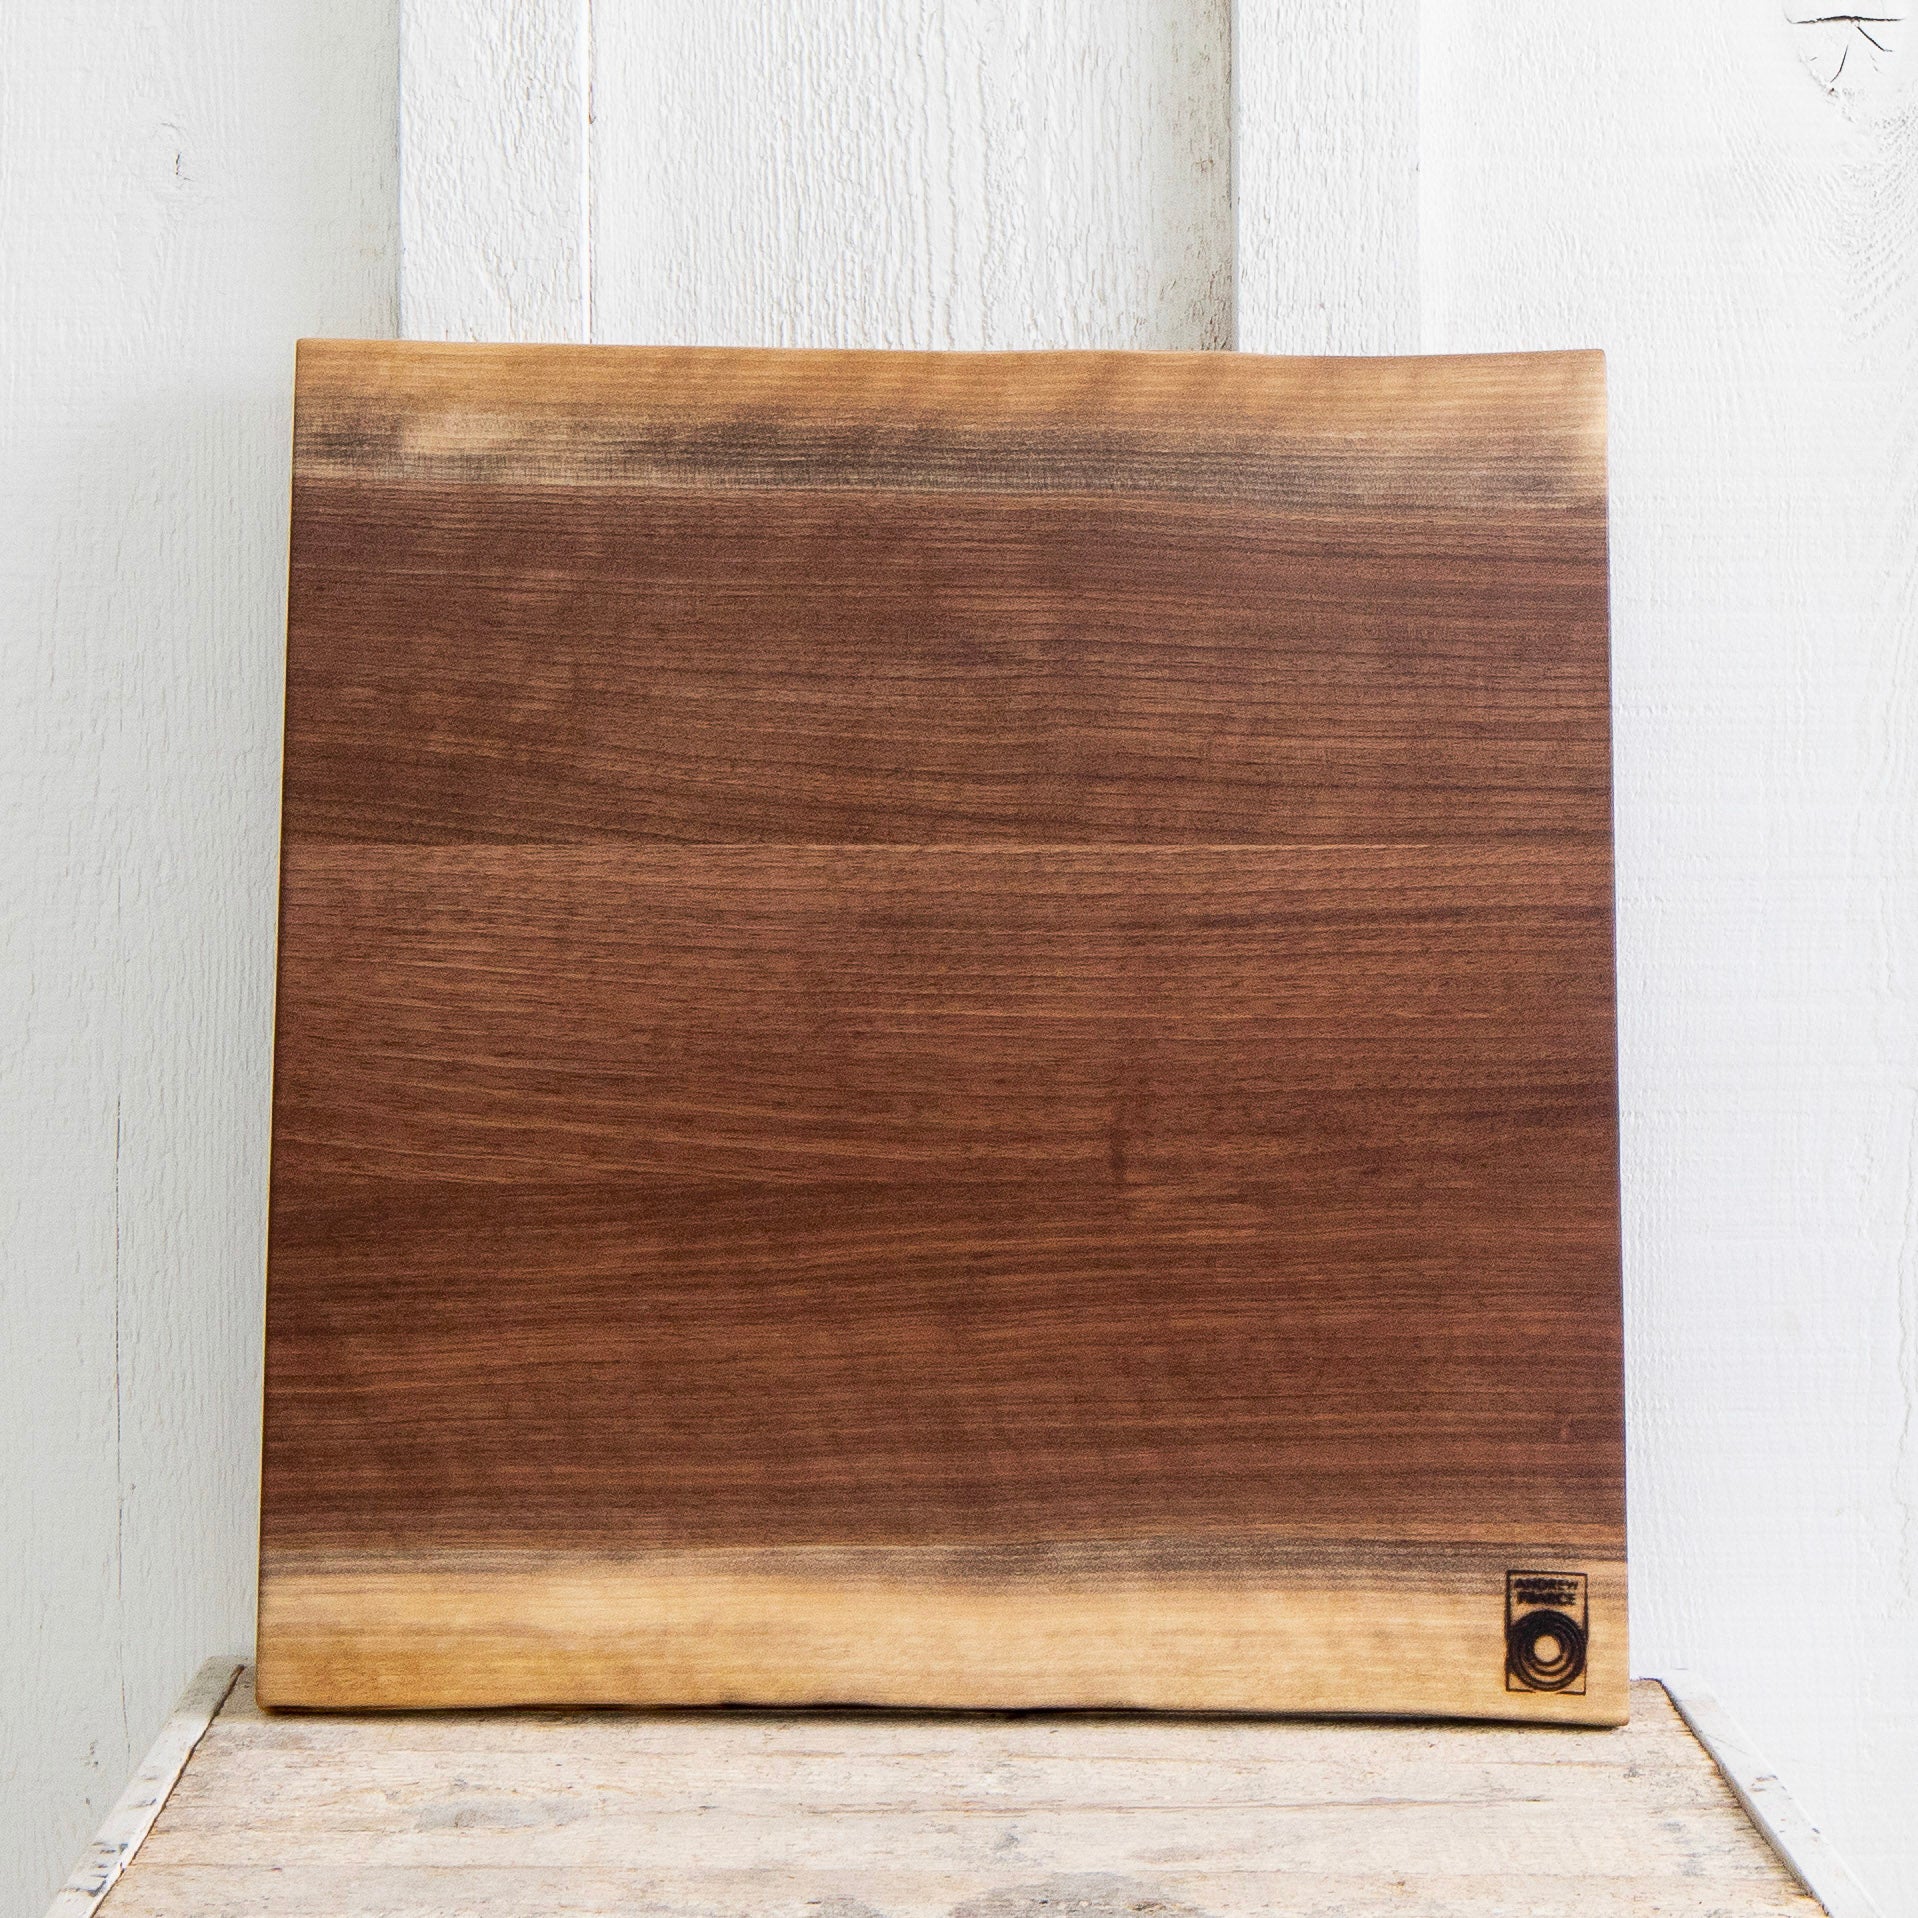 Andrew Pearce <br> Walnut Live Edge Cutting Boards